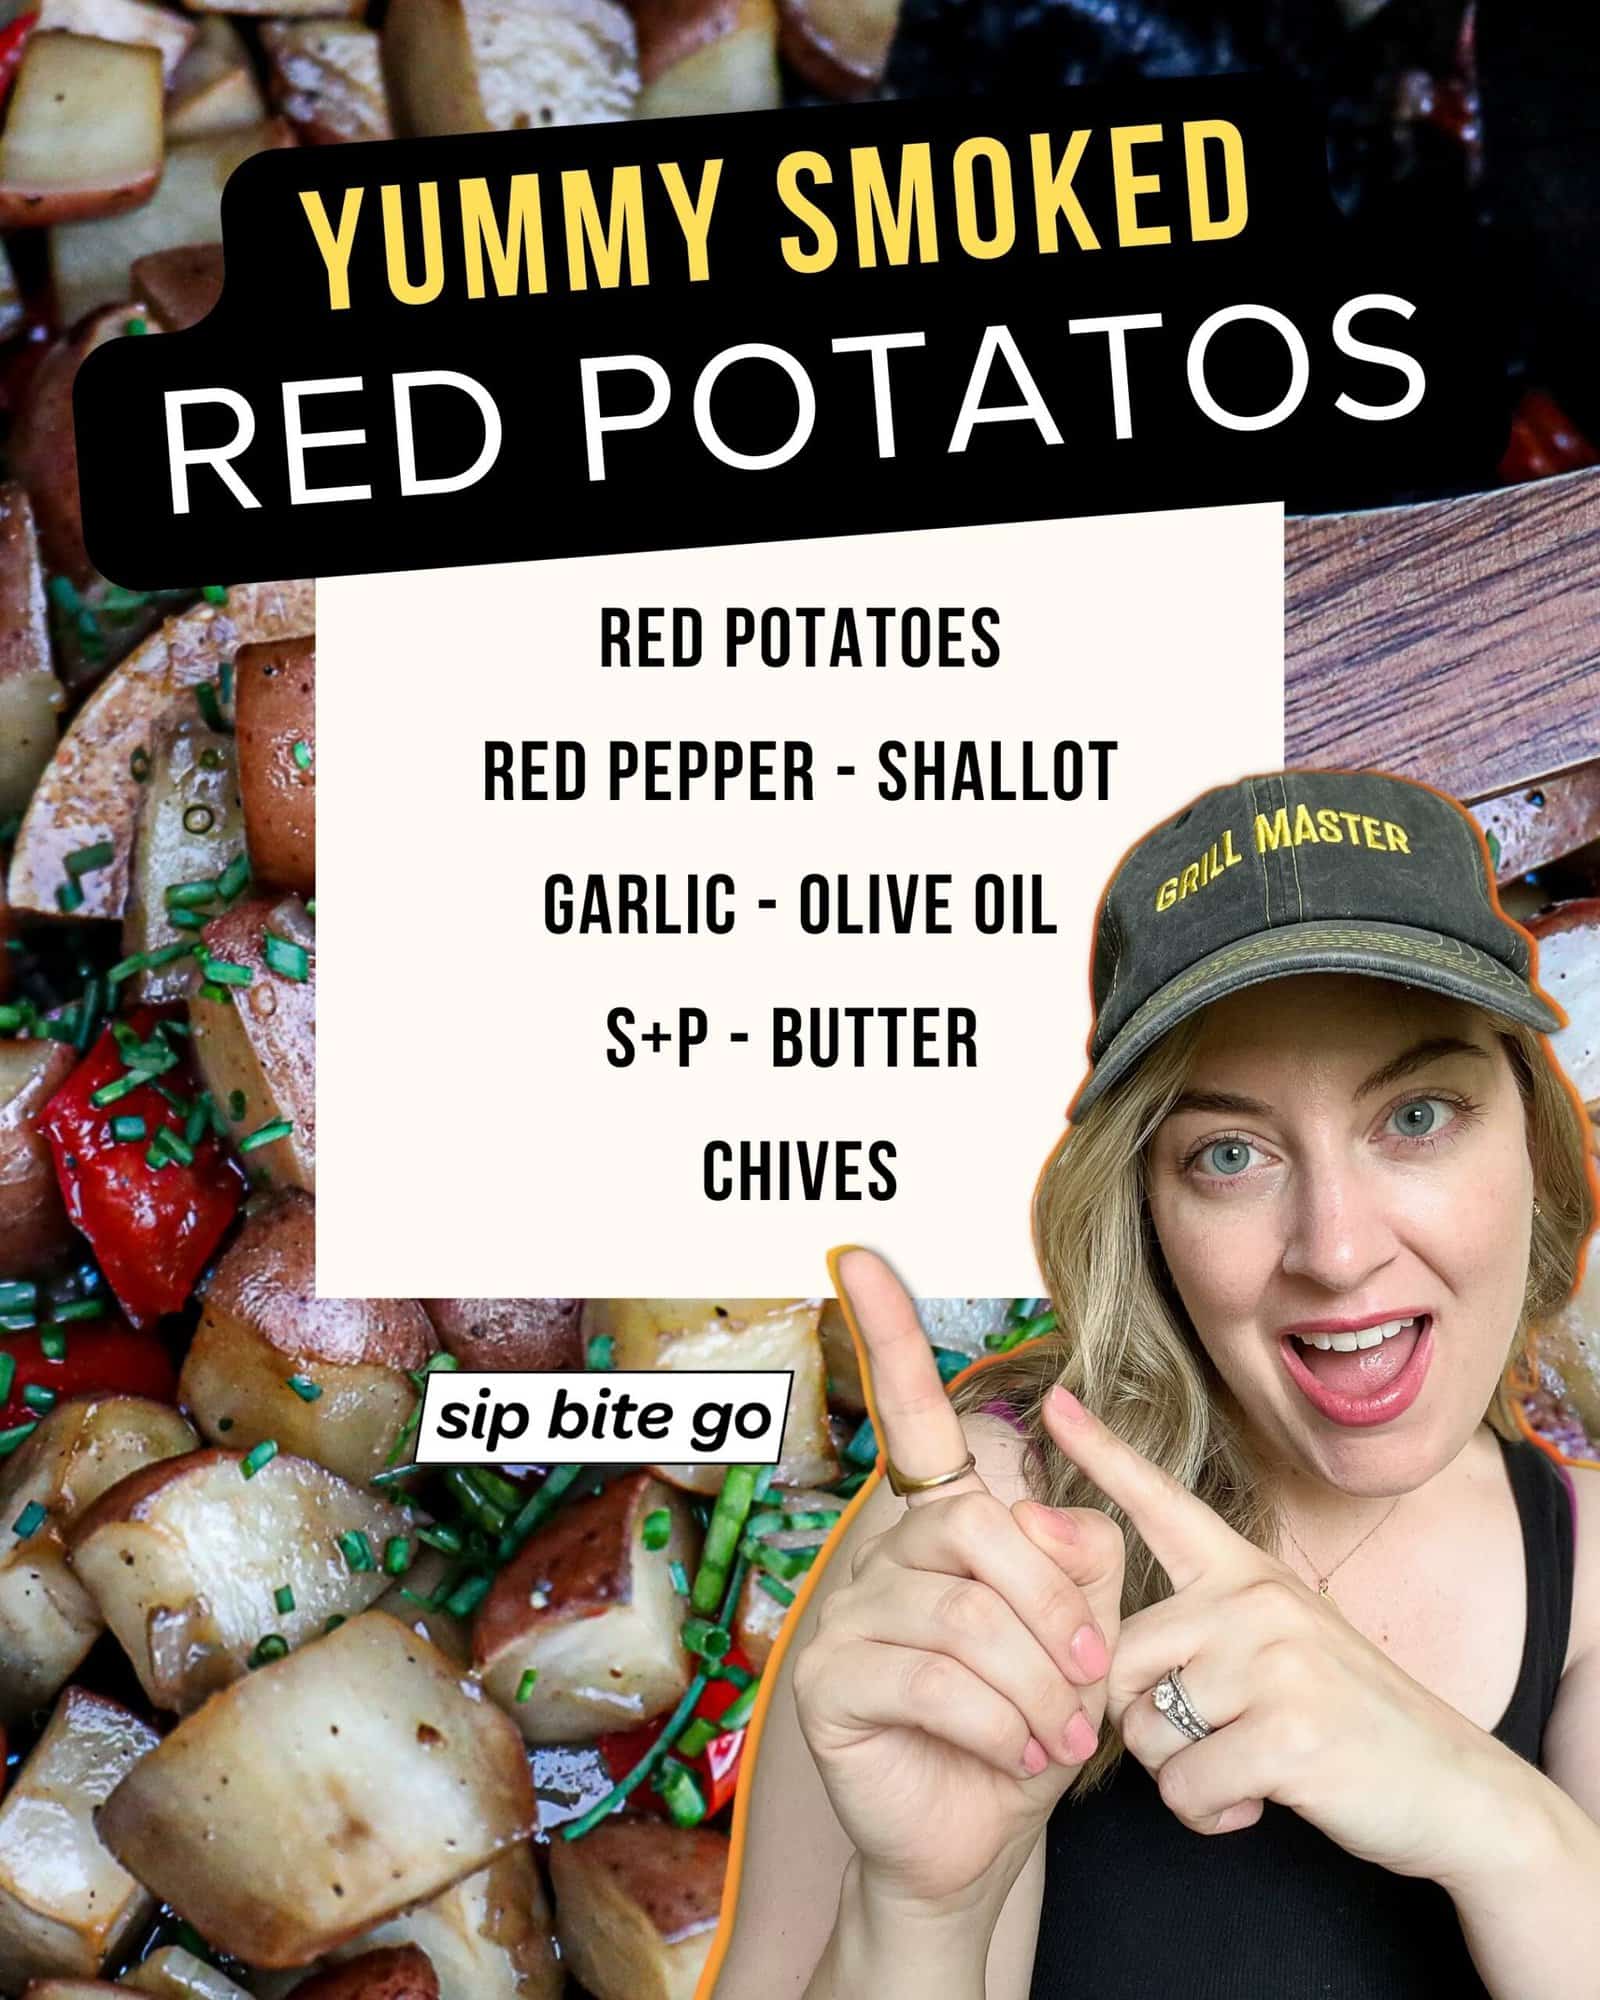 Infographic with list of ingredients and recipe photos for smoking red potatoes on the Traeger grill